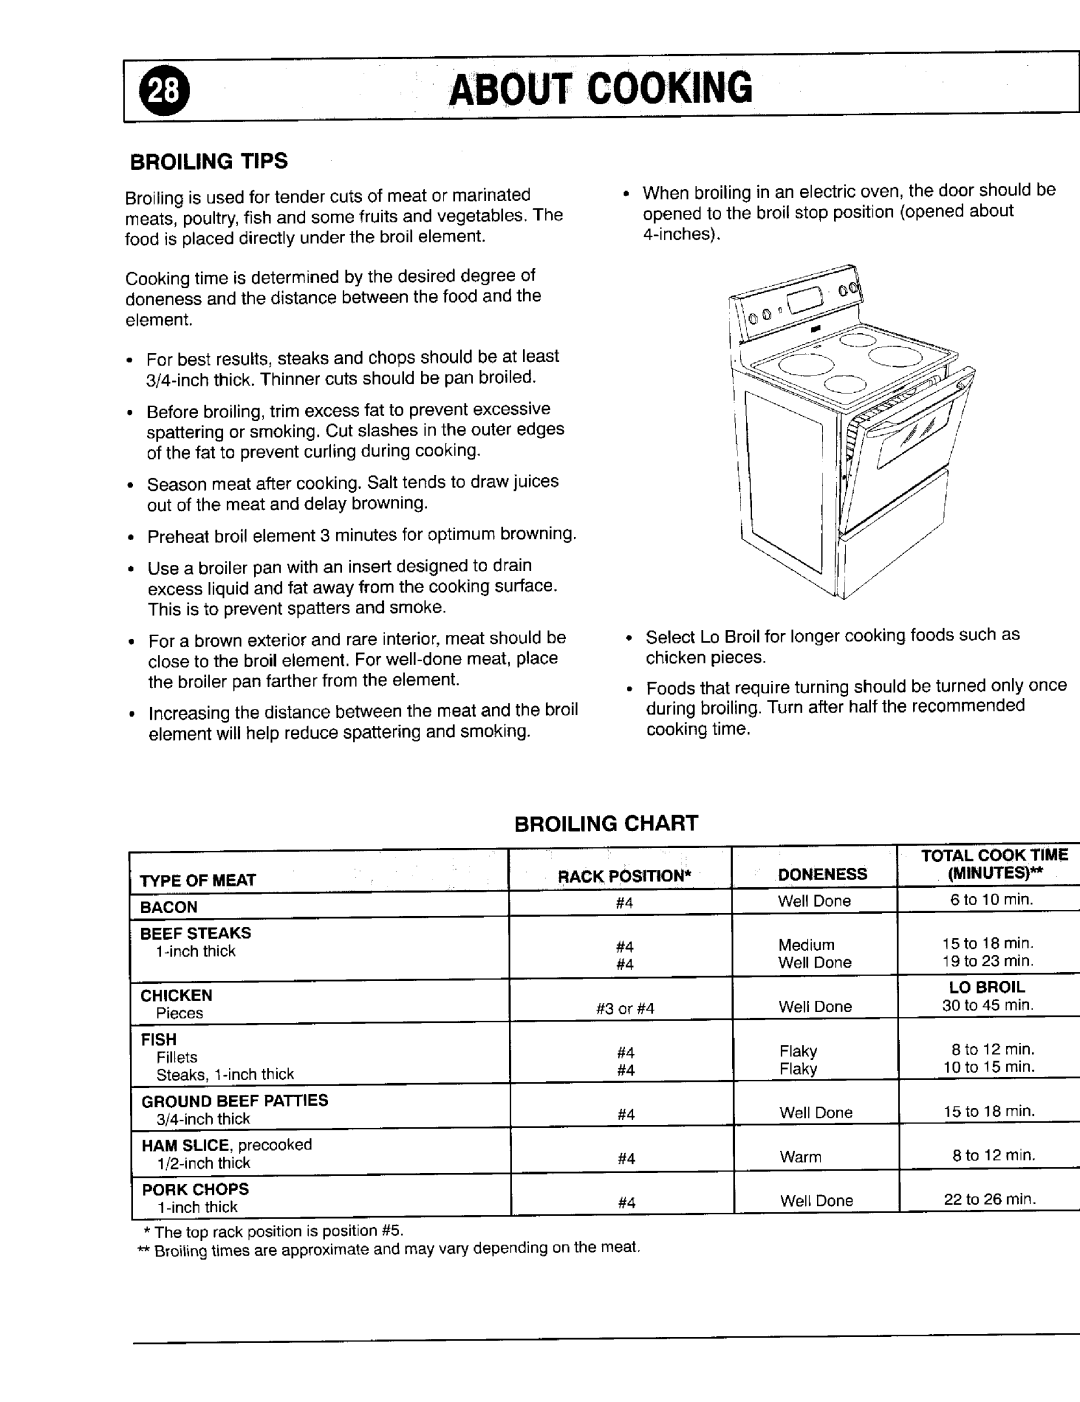 Maytag 8111P375-60 important safety instructions Broiling Tips, Broiling Chart, Aboutcooking 